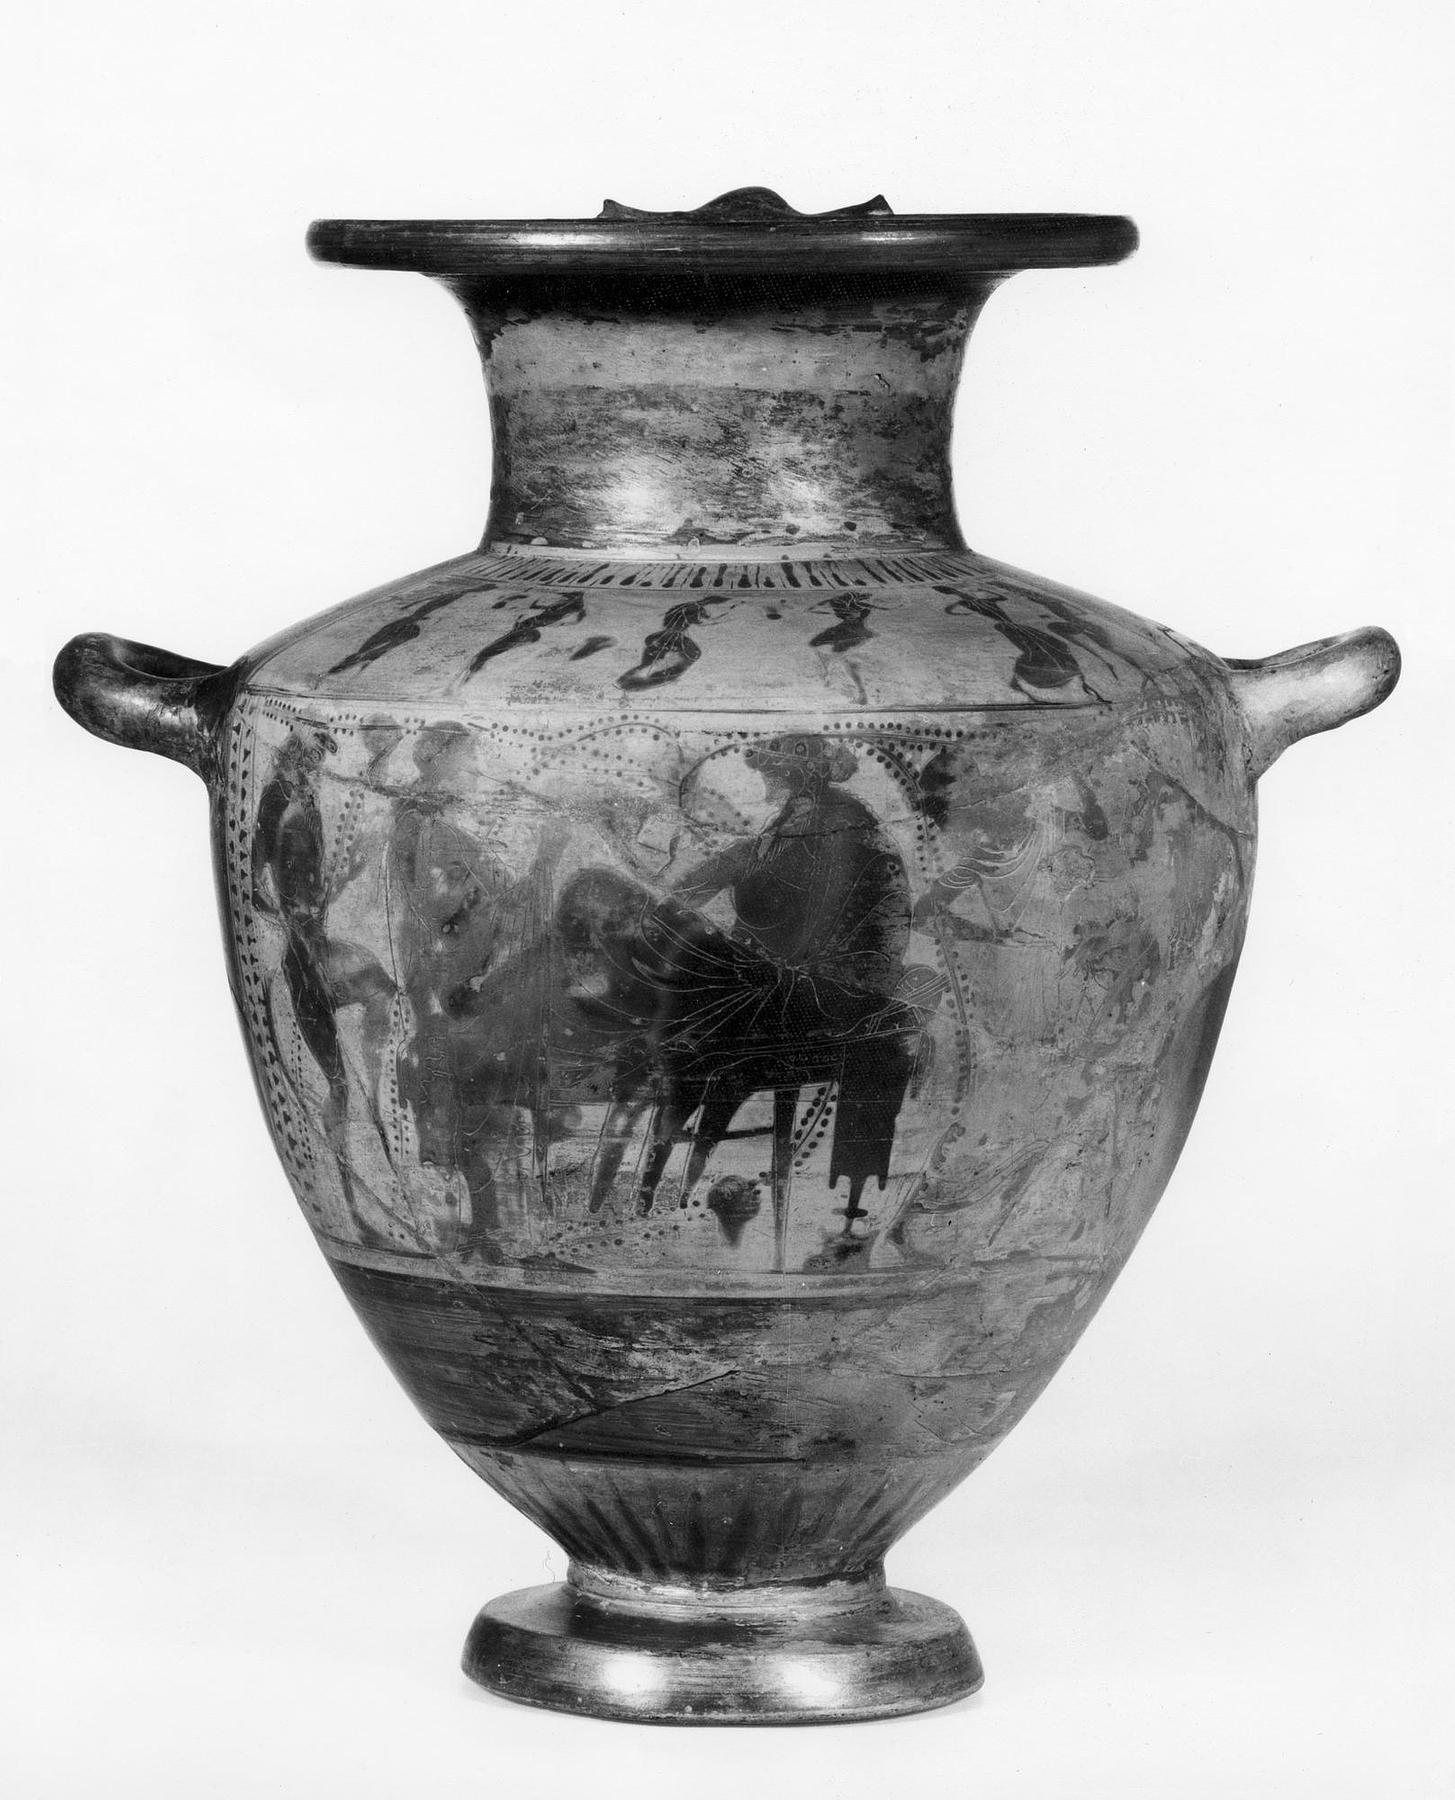 Hydria with Dionysos among sileni and maenads (body) and dancing sileni and maenads (shoulder), H517